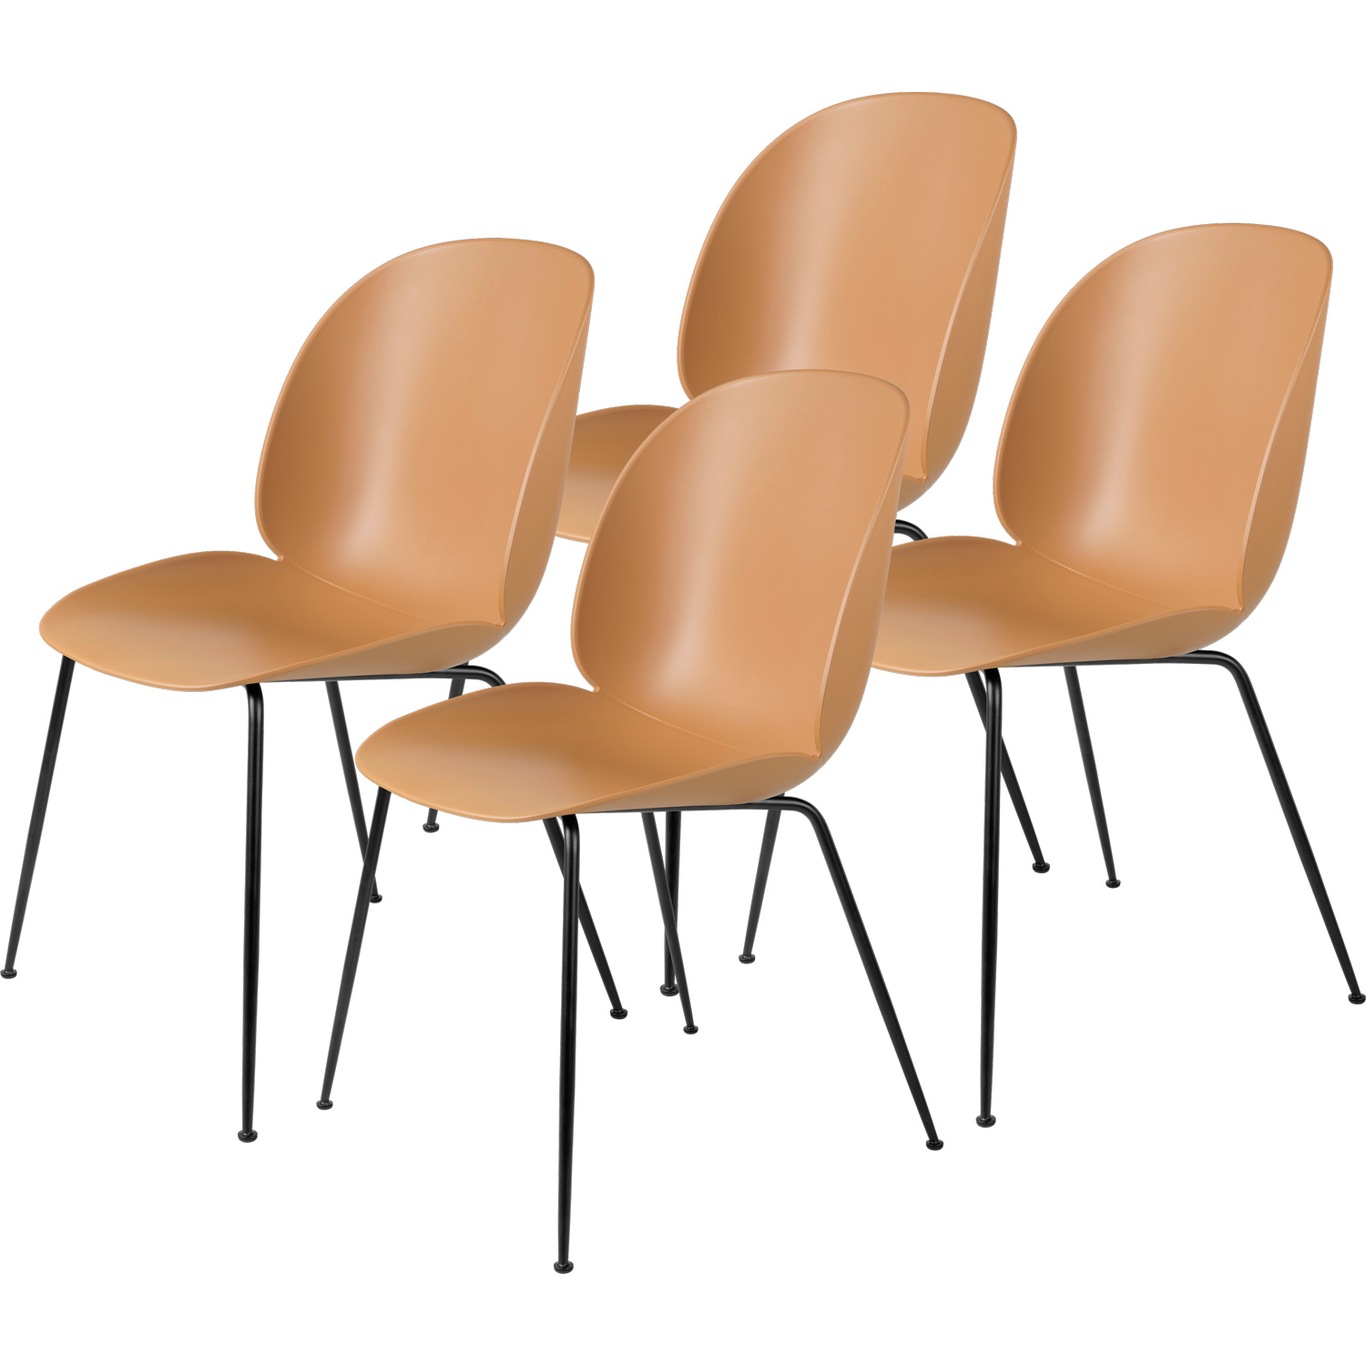 Beetle Dining Chair Unupholstered, Conic Base Black, Set Of 4, Amber Brown